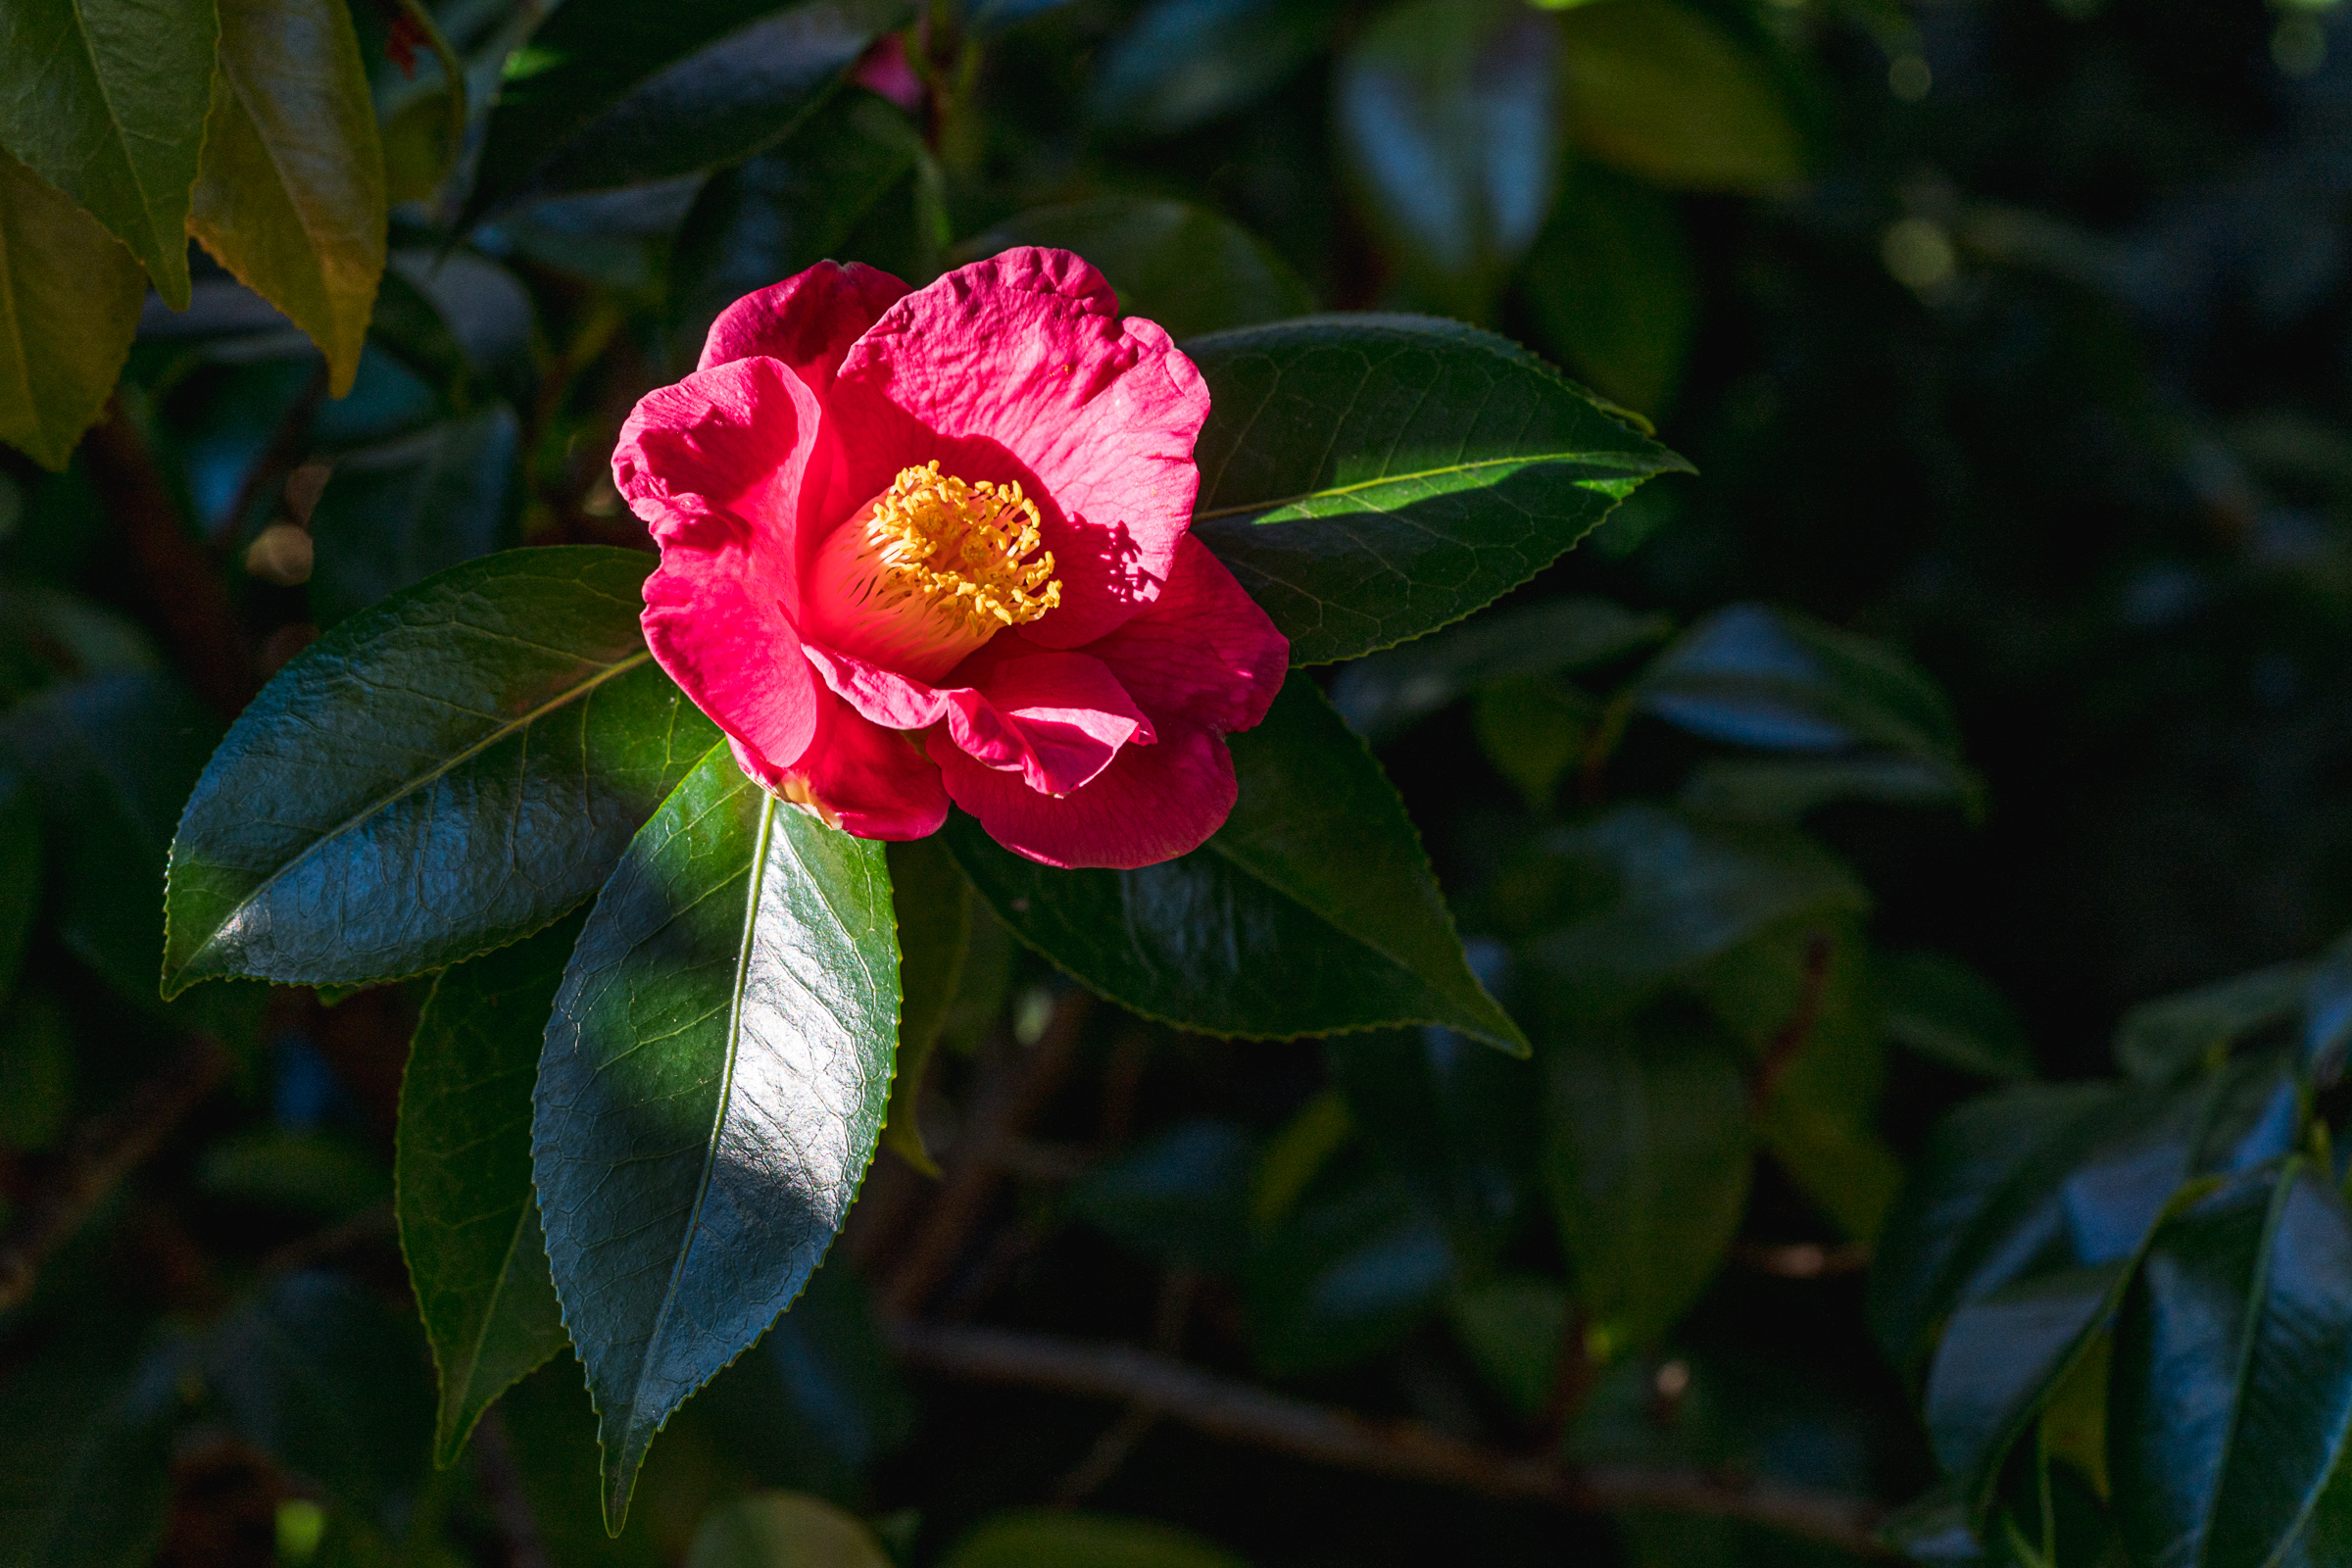 A bright pink flower blooms among green foliage in the sunlight